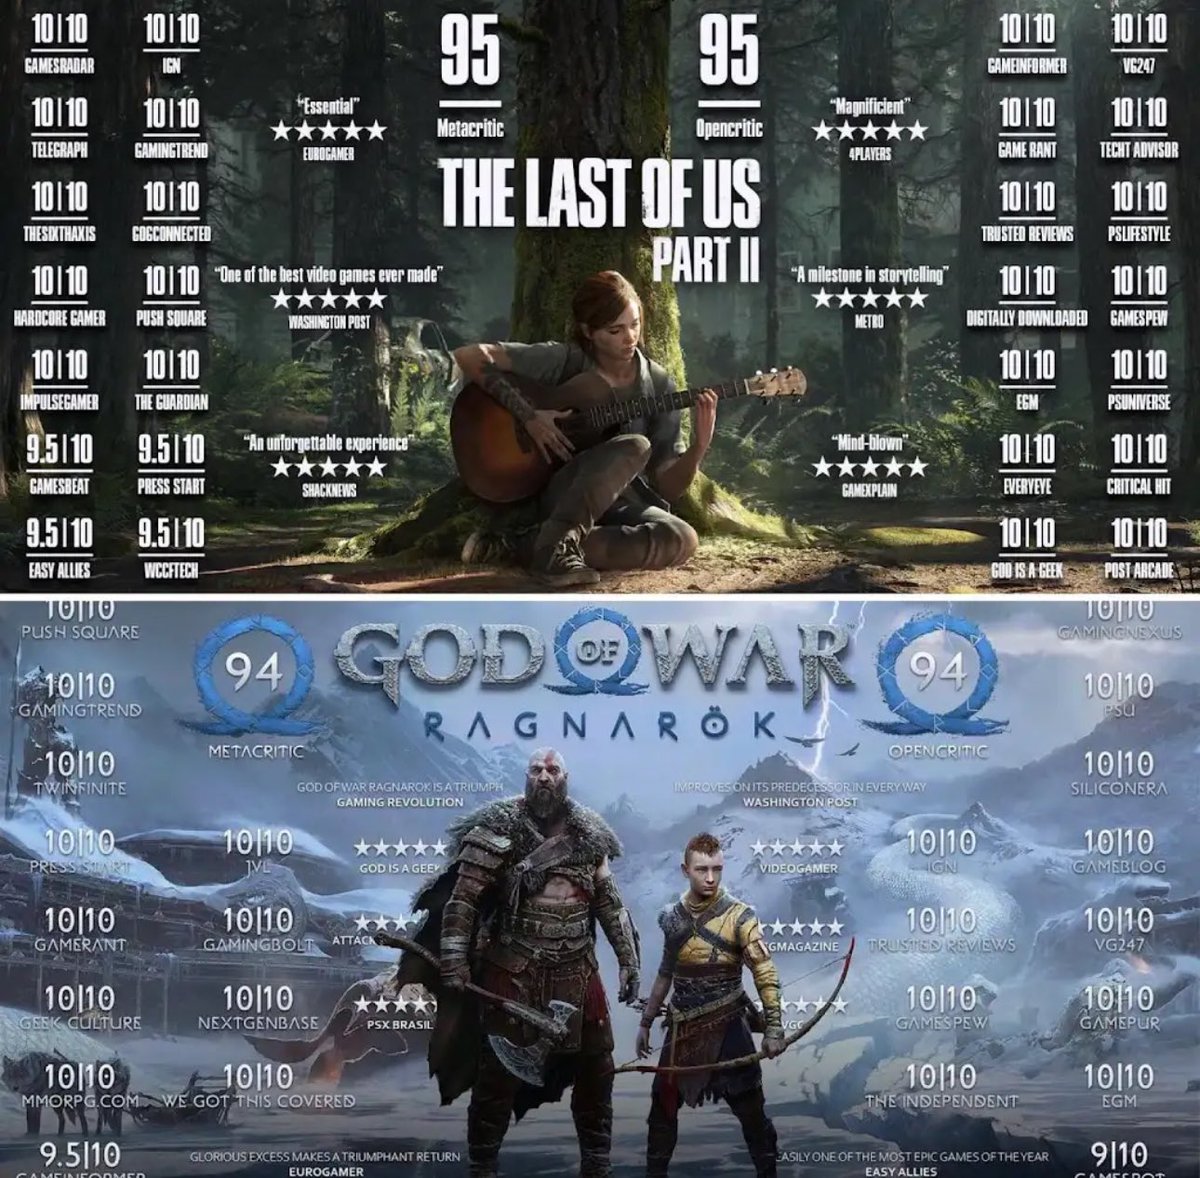 Two of the best PlayStation Titles we’ve seen to date 🔥🔥